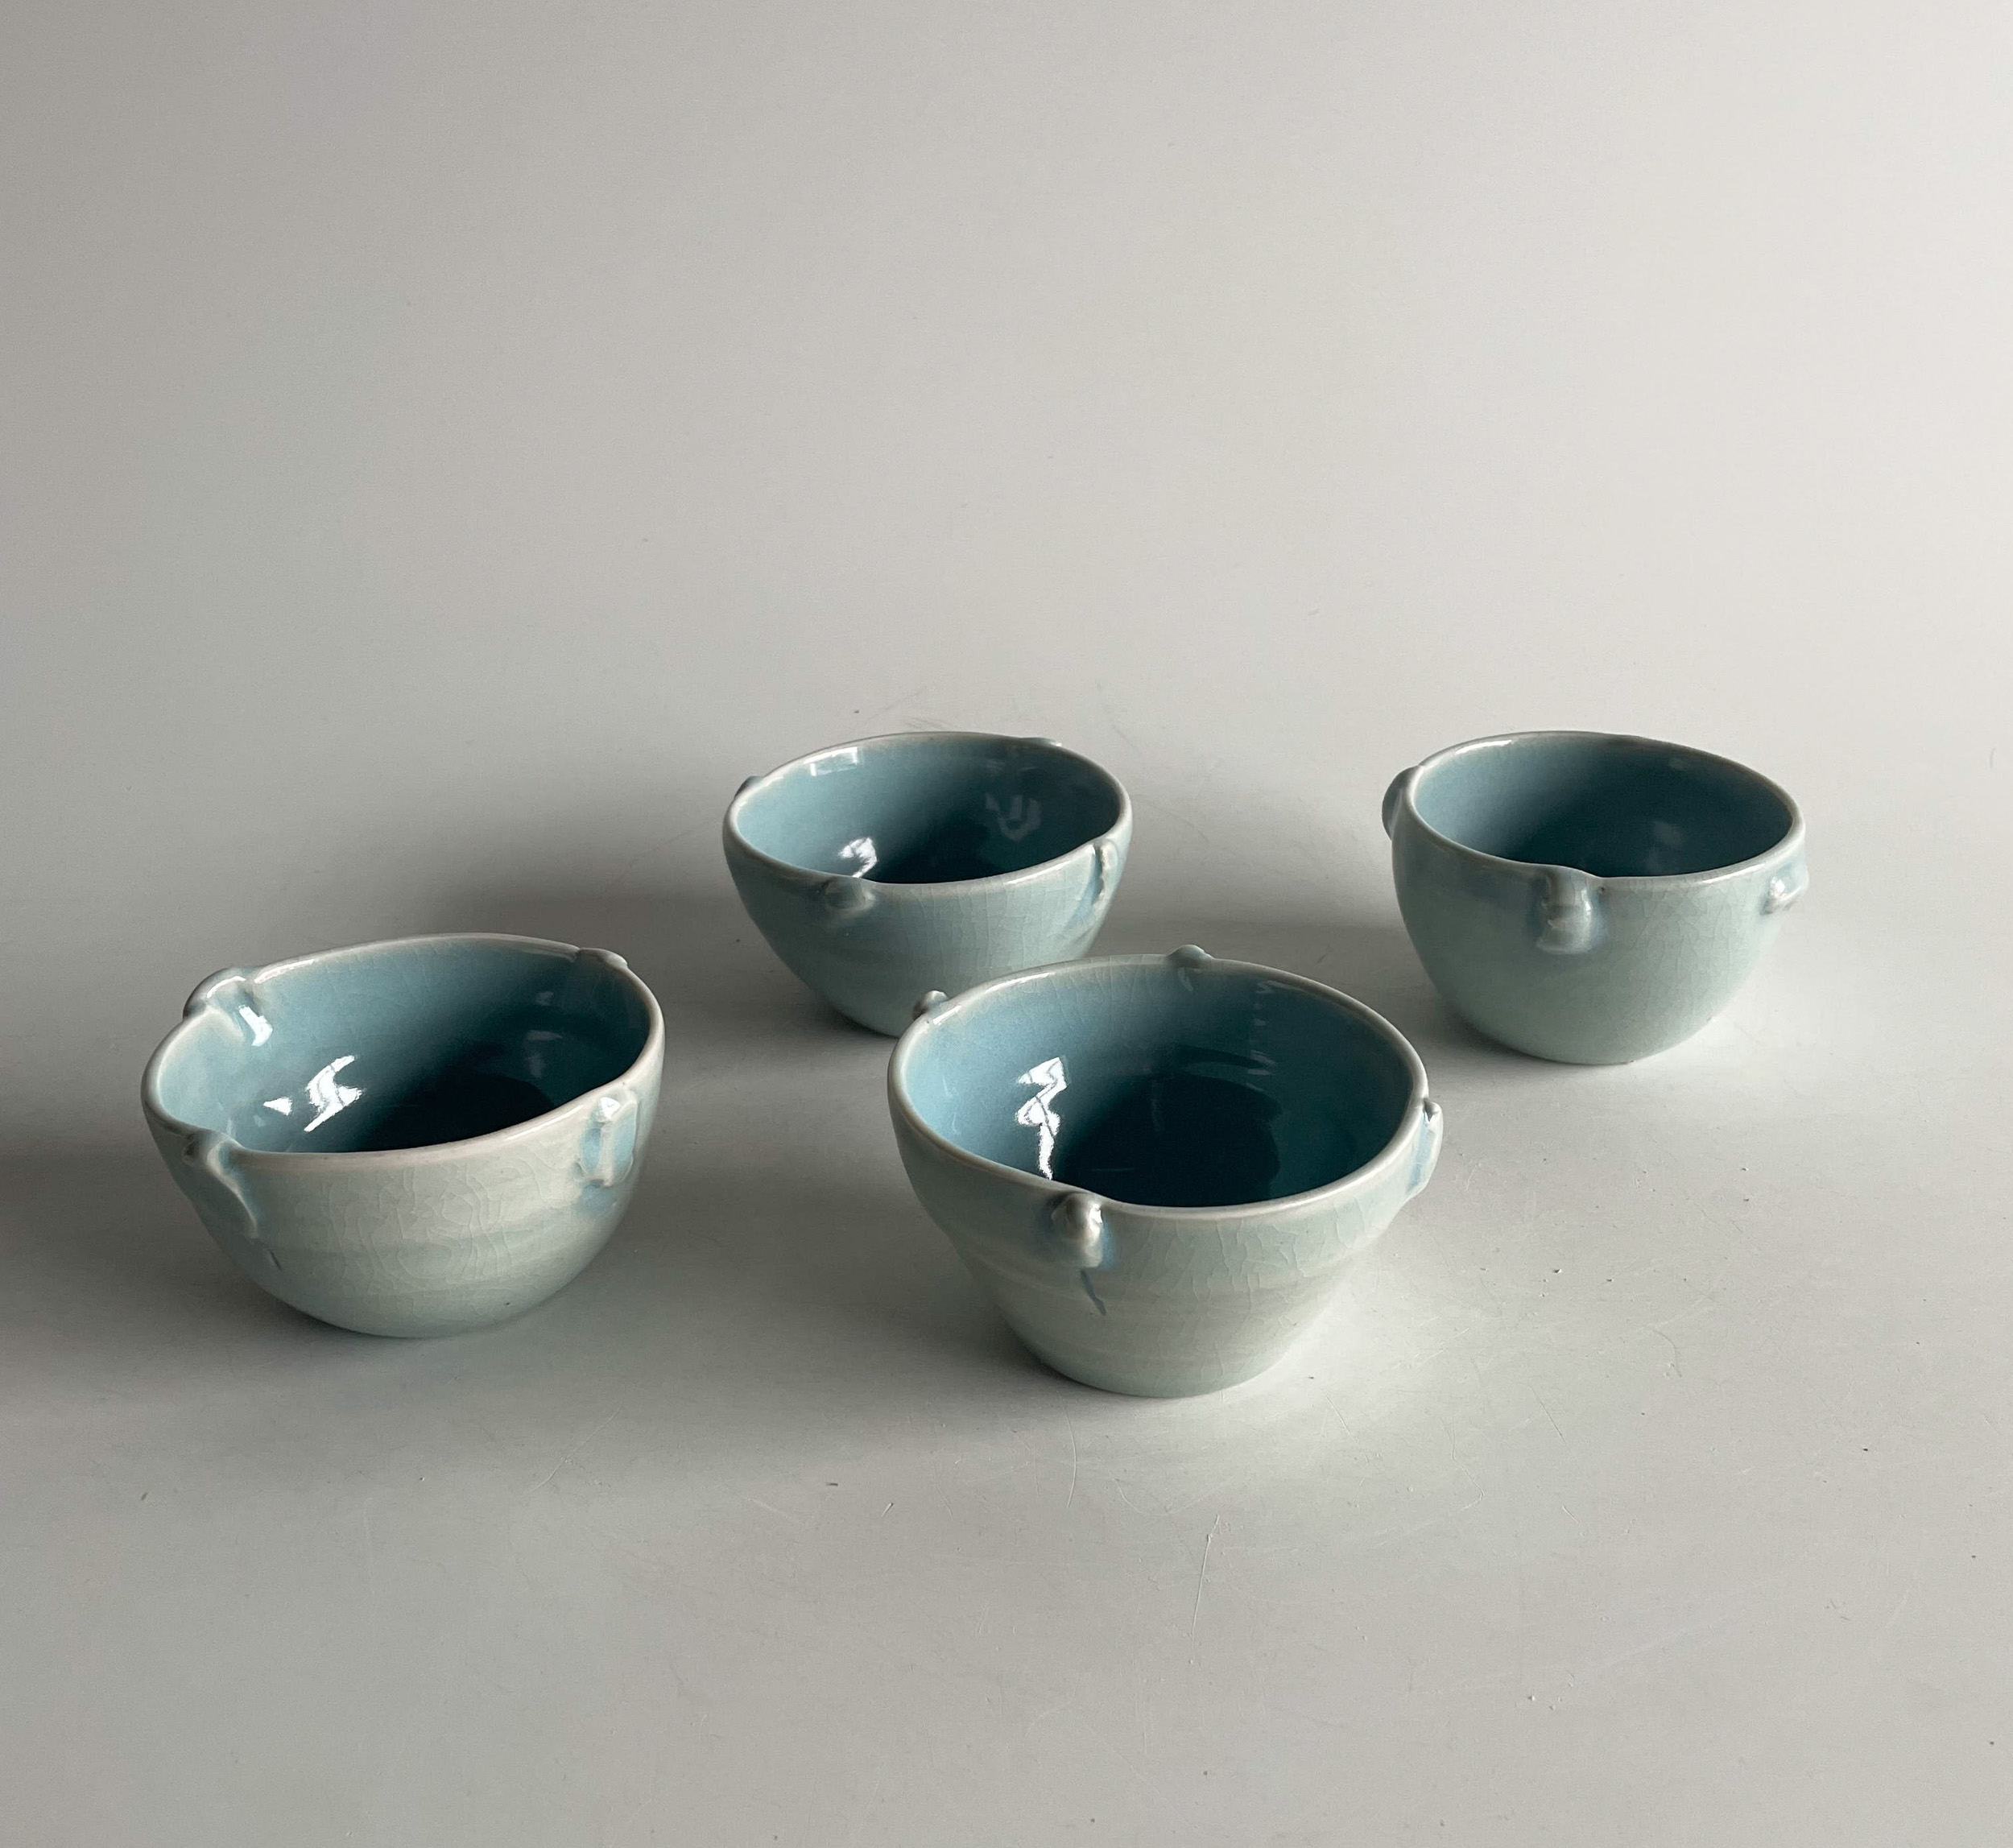 set of four unique porcelain bowls by Luis Roldán from theMUST.co. Color light blue.